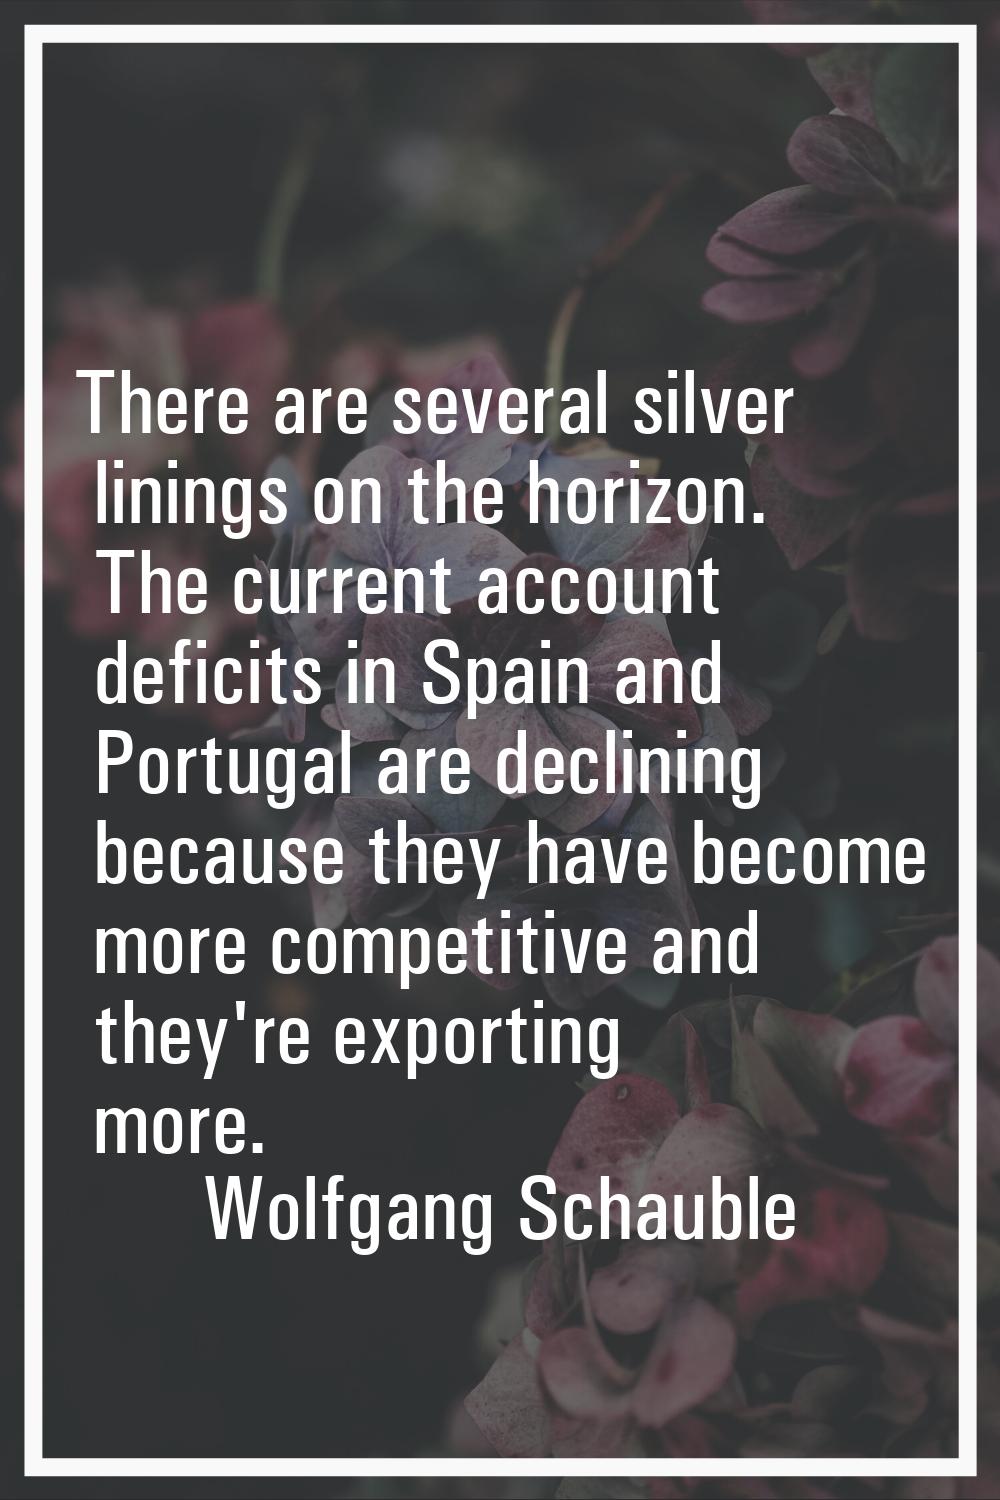 There are several silver linings on the horizon. The current account deficits in Spain and Portugal